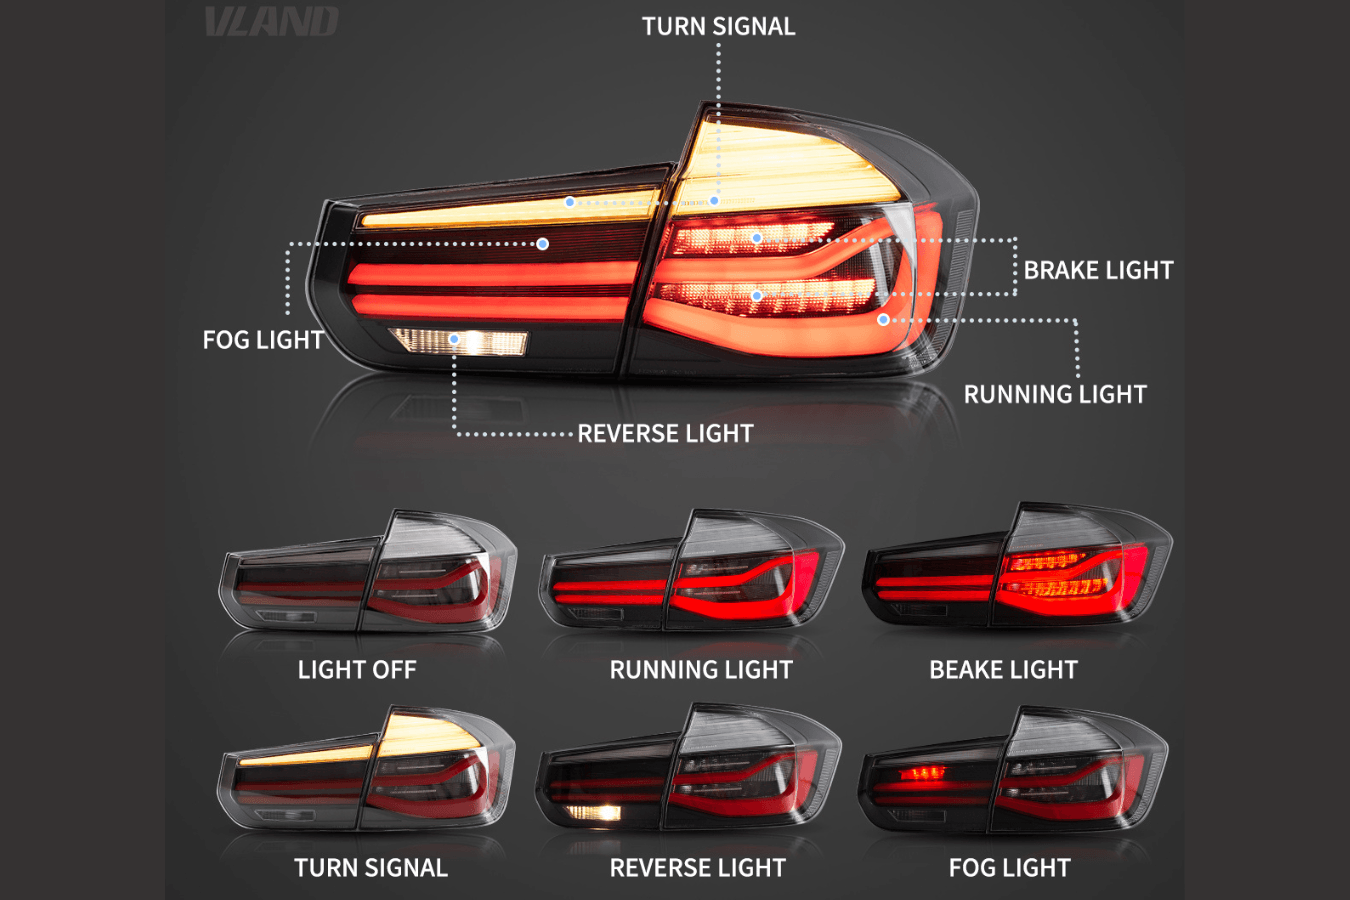 Brightest 500 Lumen H21W 6W x2 Canbus Error Free LED Reverse Backup Light  Bulbs For BMW F30 LCI Tail Light – Unique Style Racing